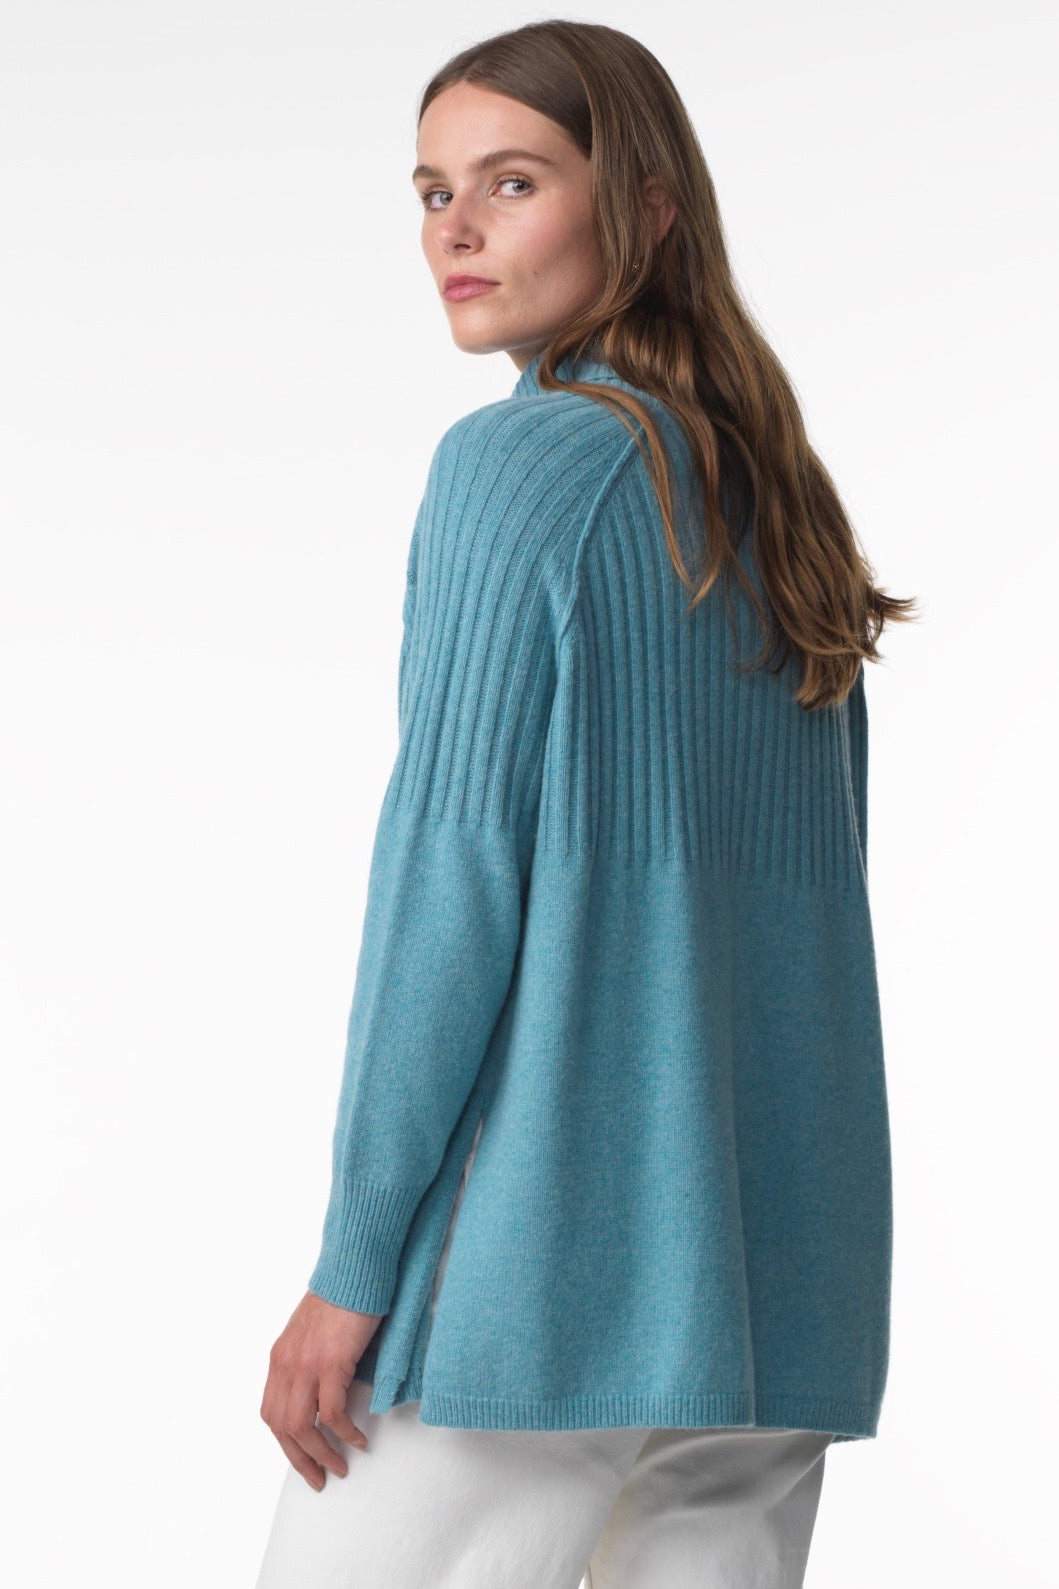 Zaket & Plover Zaket & Plover - Rib Detail Sweater - Mist available at The Good Life Boutique